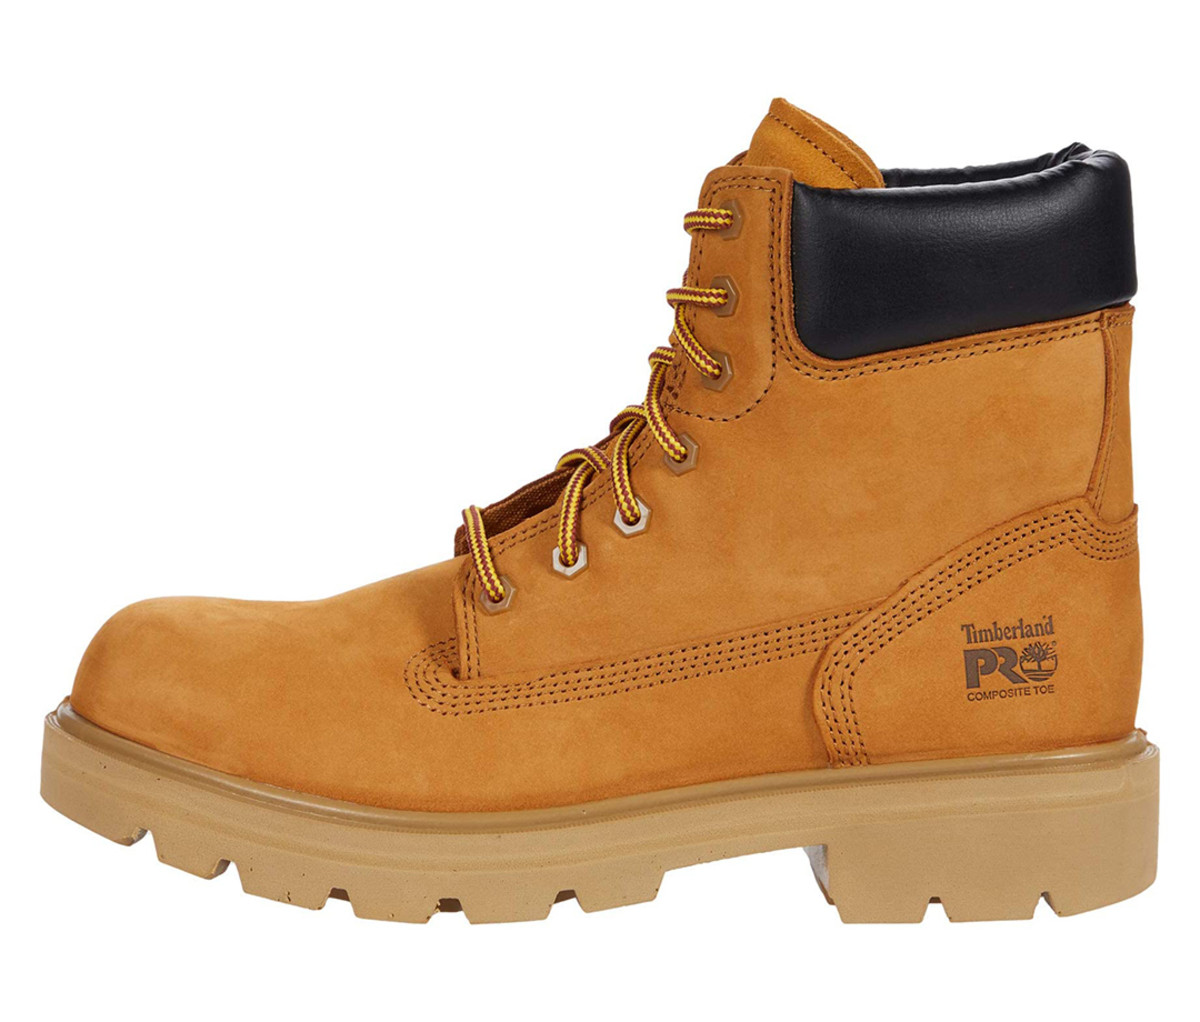 Timberland PRO Sawhorse 6' Composite Safety Toe Boots